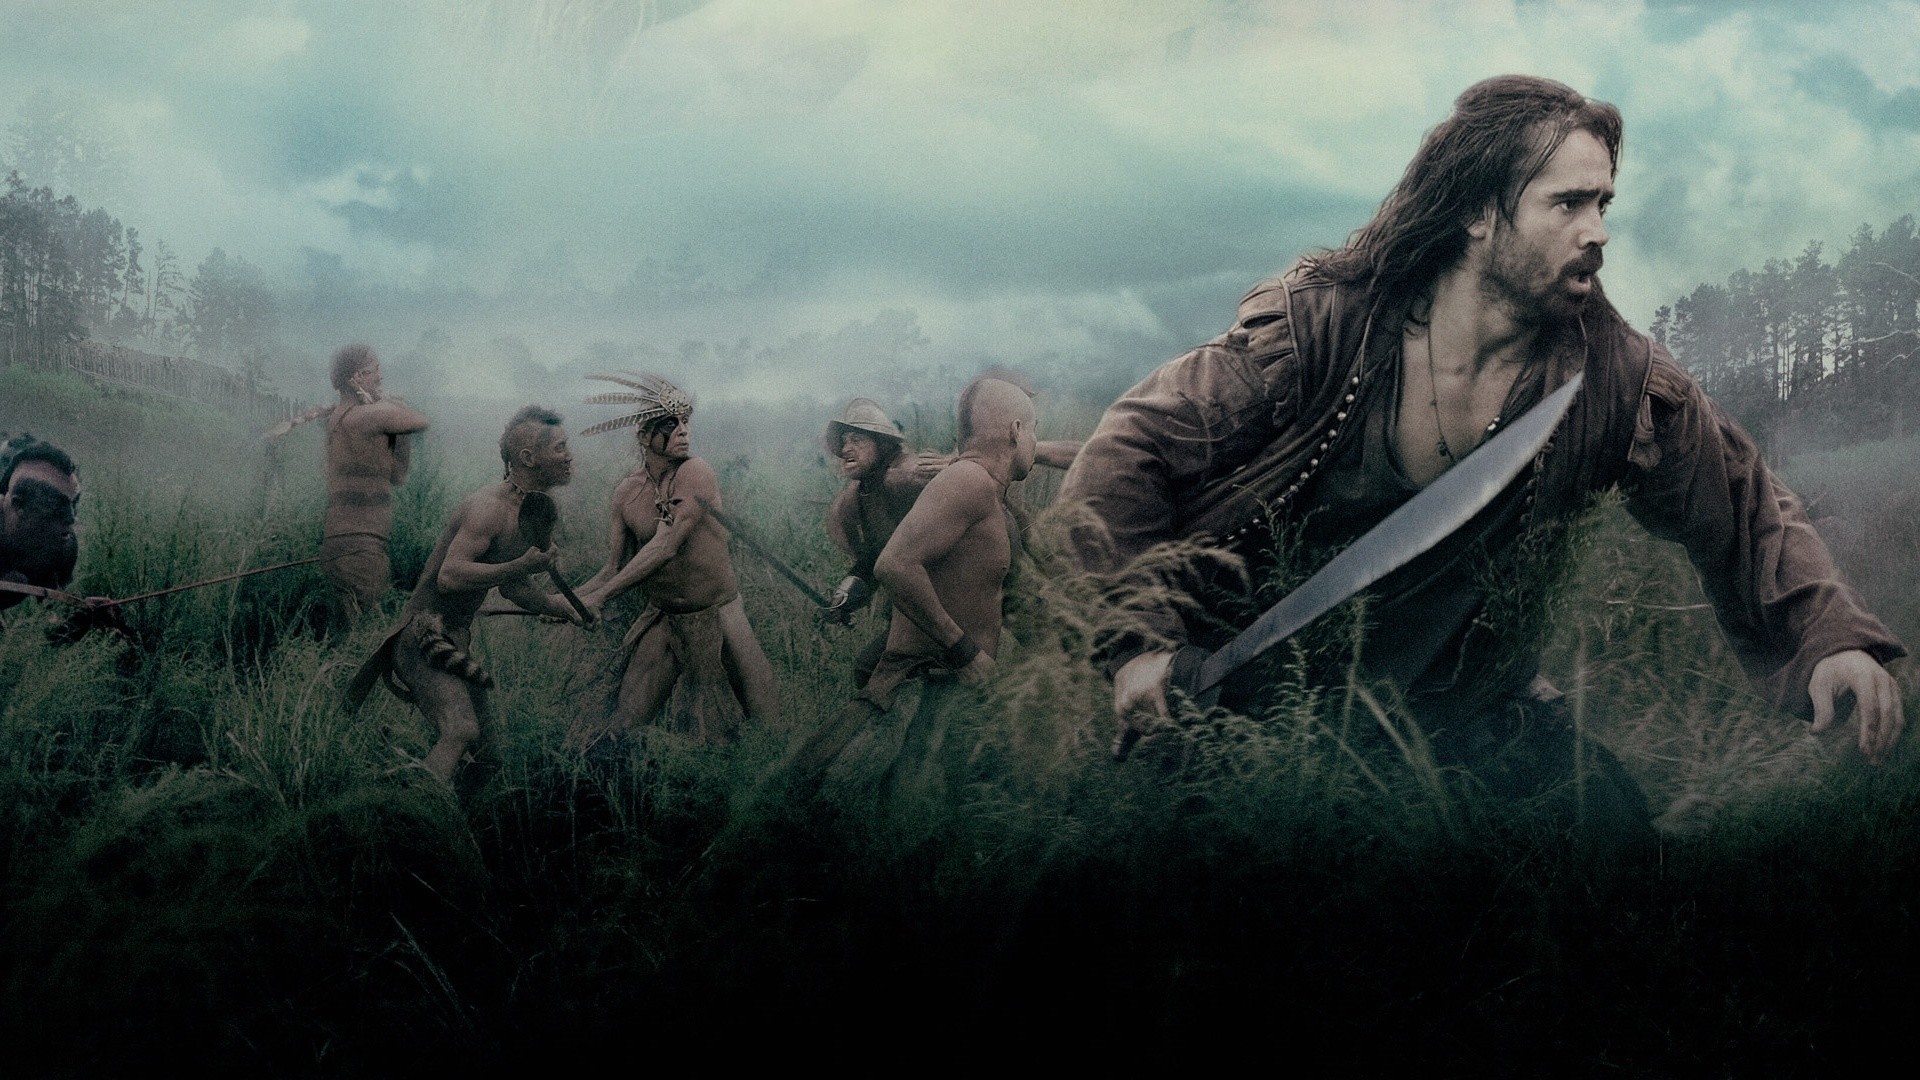 Movie The New World (2005) HD Wallpaper | Background Image